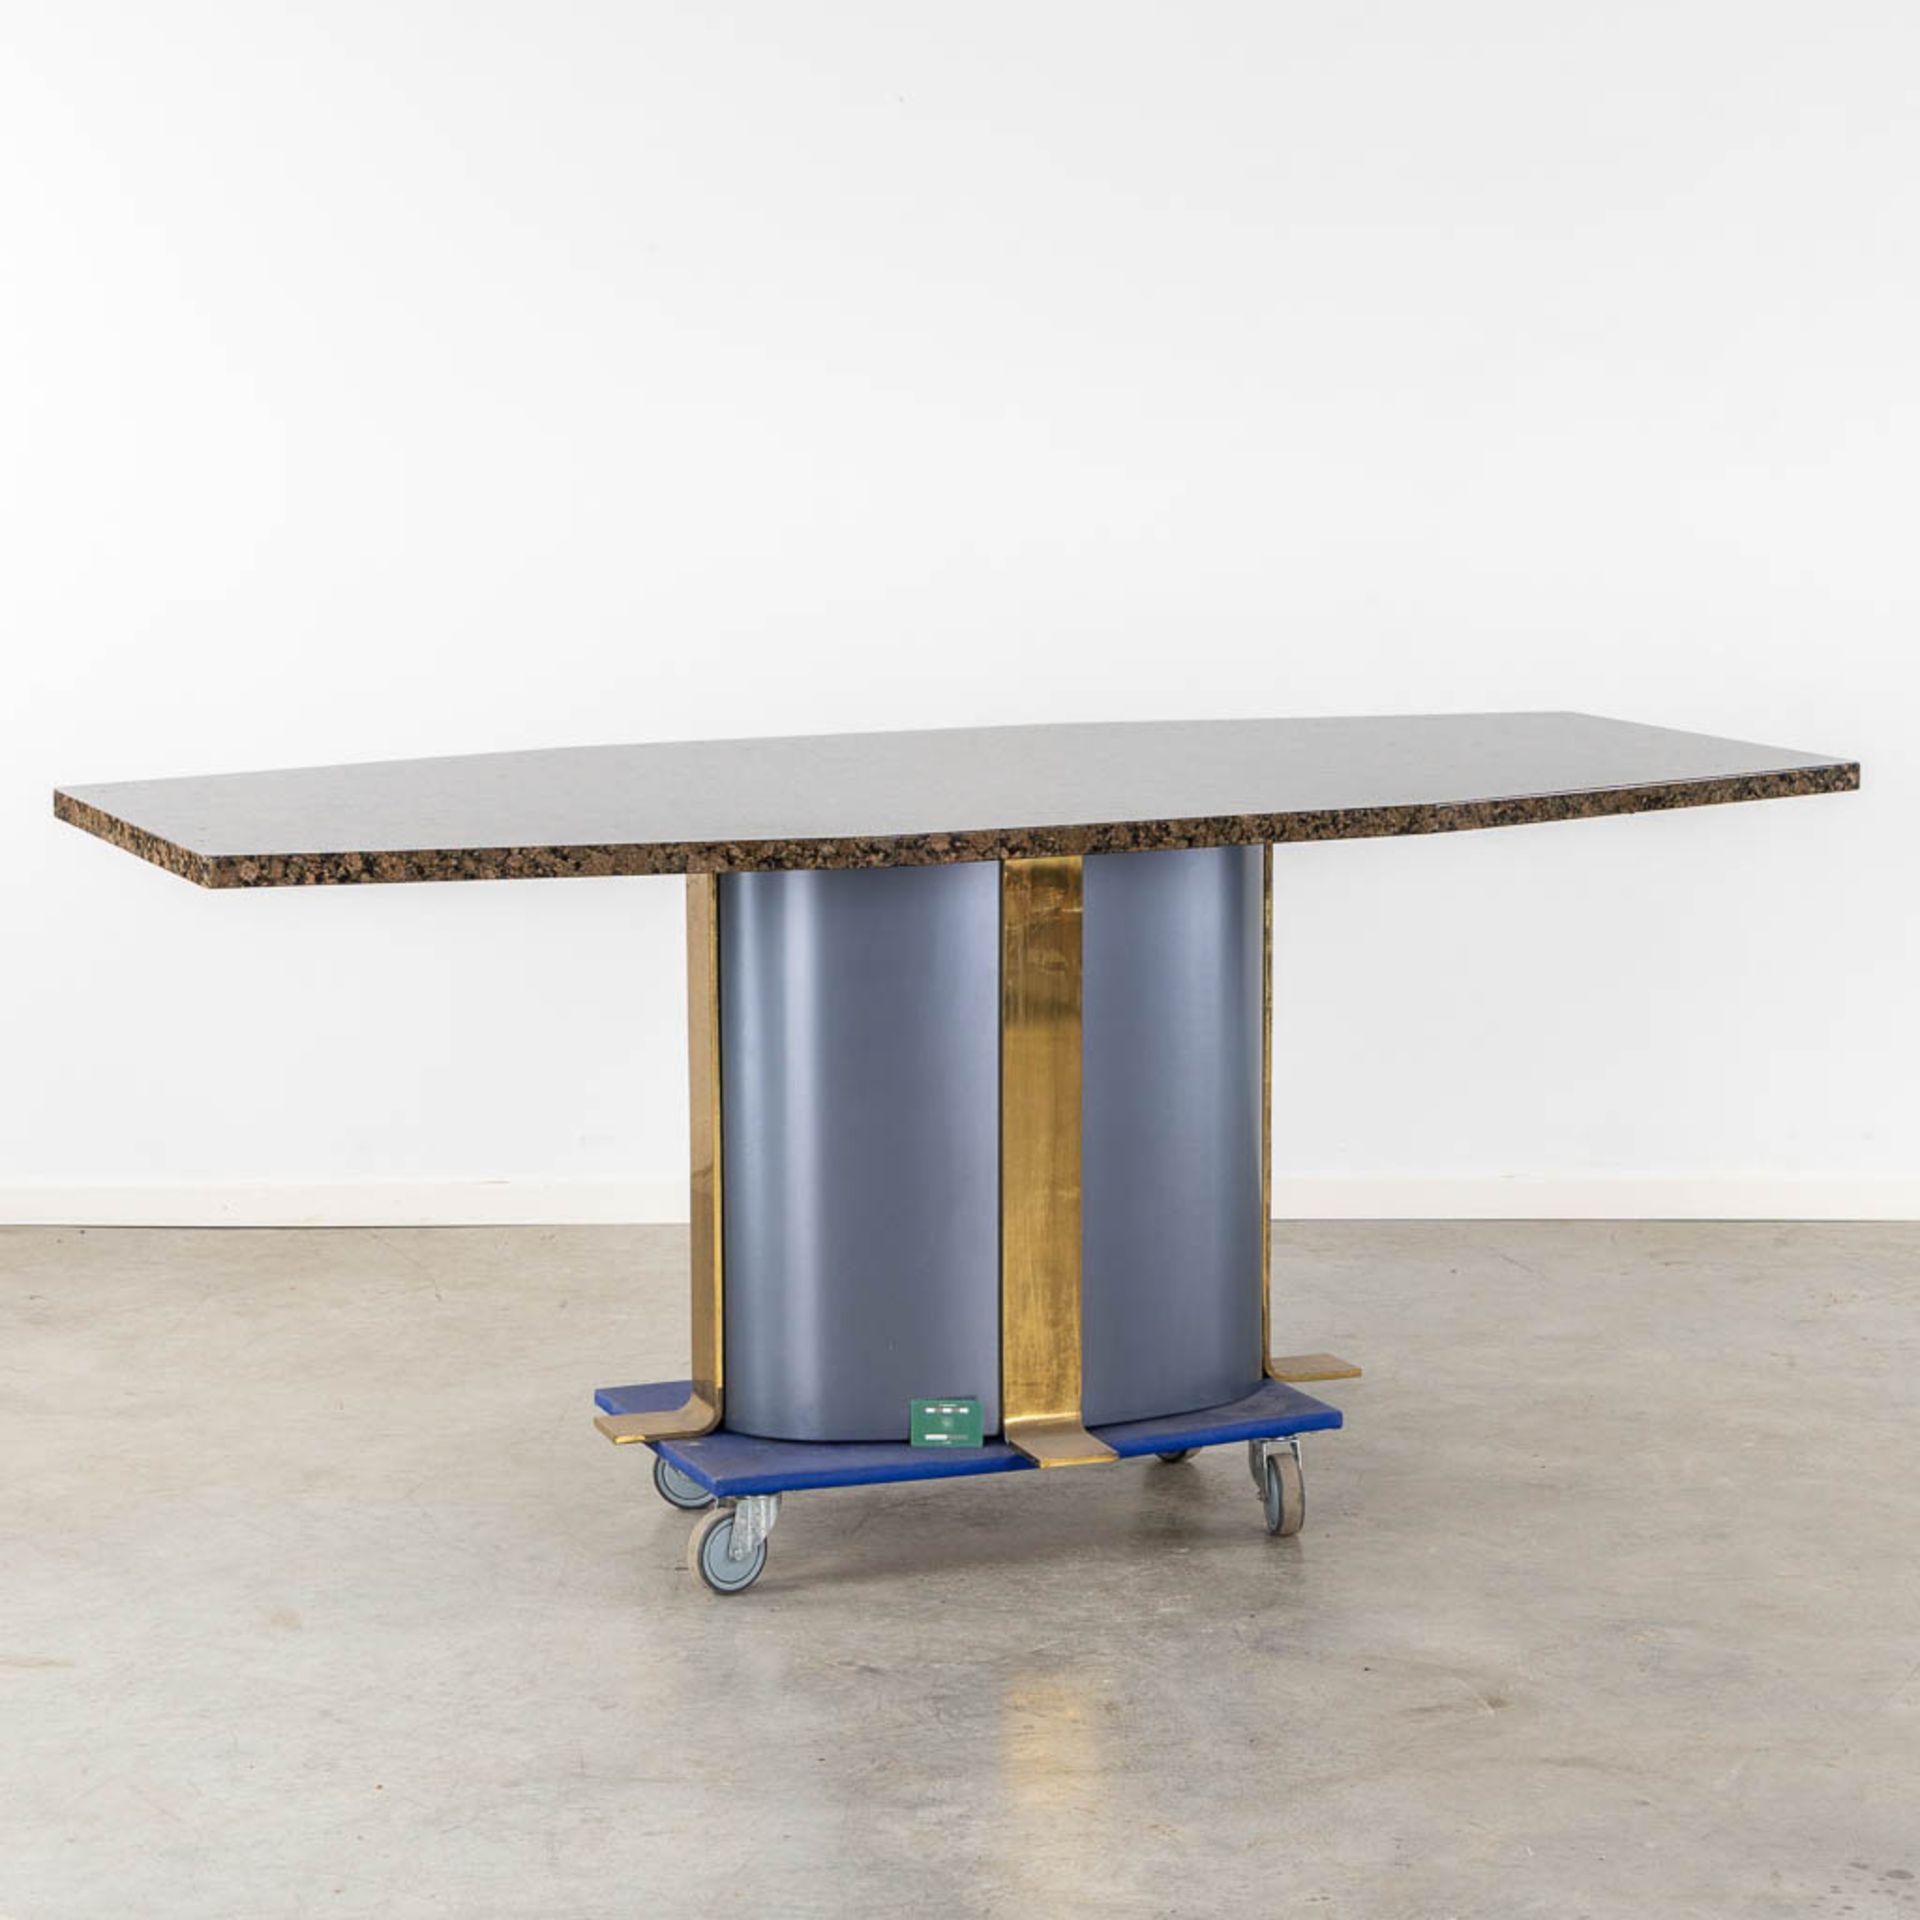 A diningroom table, bronze and patinated metal with a granite table top. (L:101 x W:210 x H:79 cm) - Bild 2 aus 10